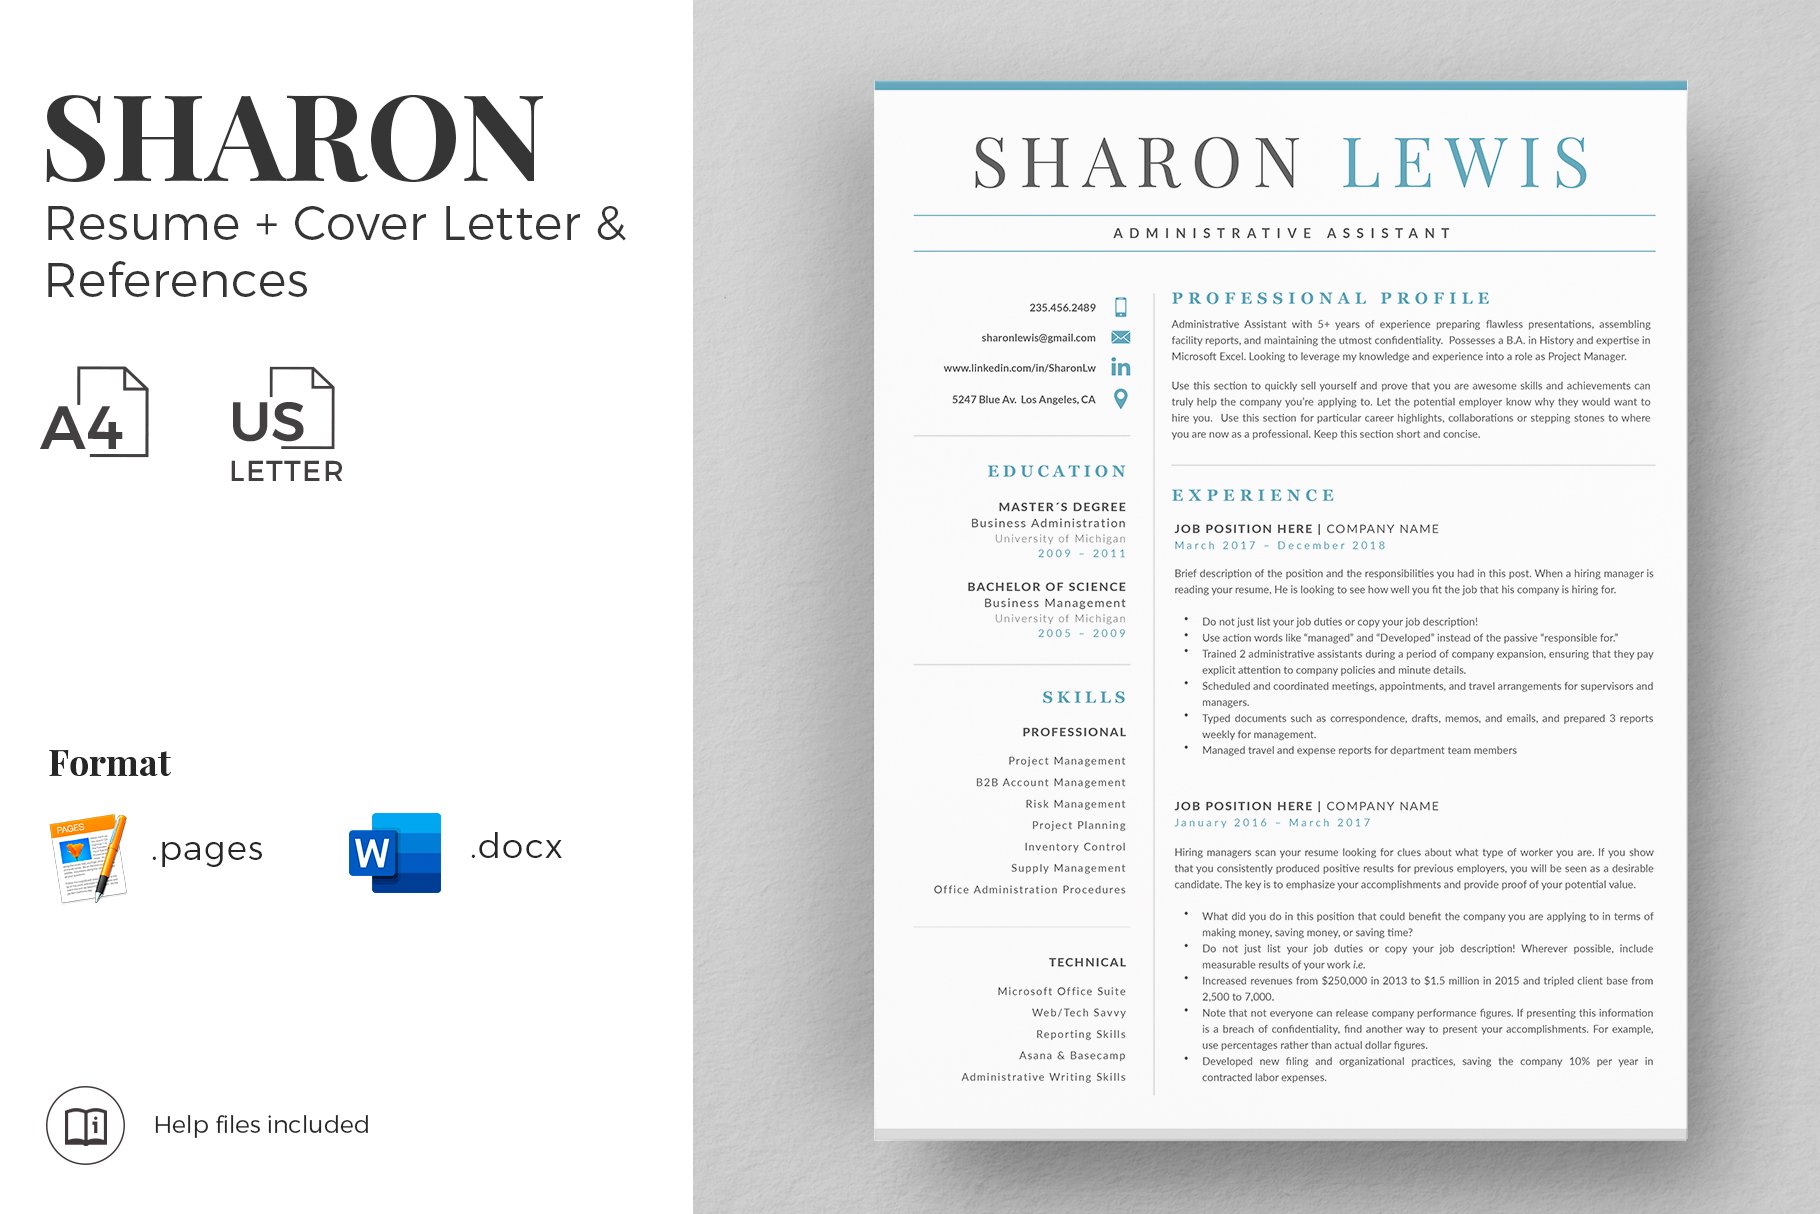 Professional Resume Format Example cover image.